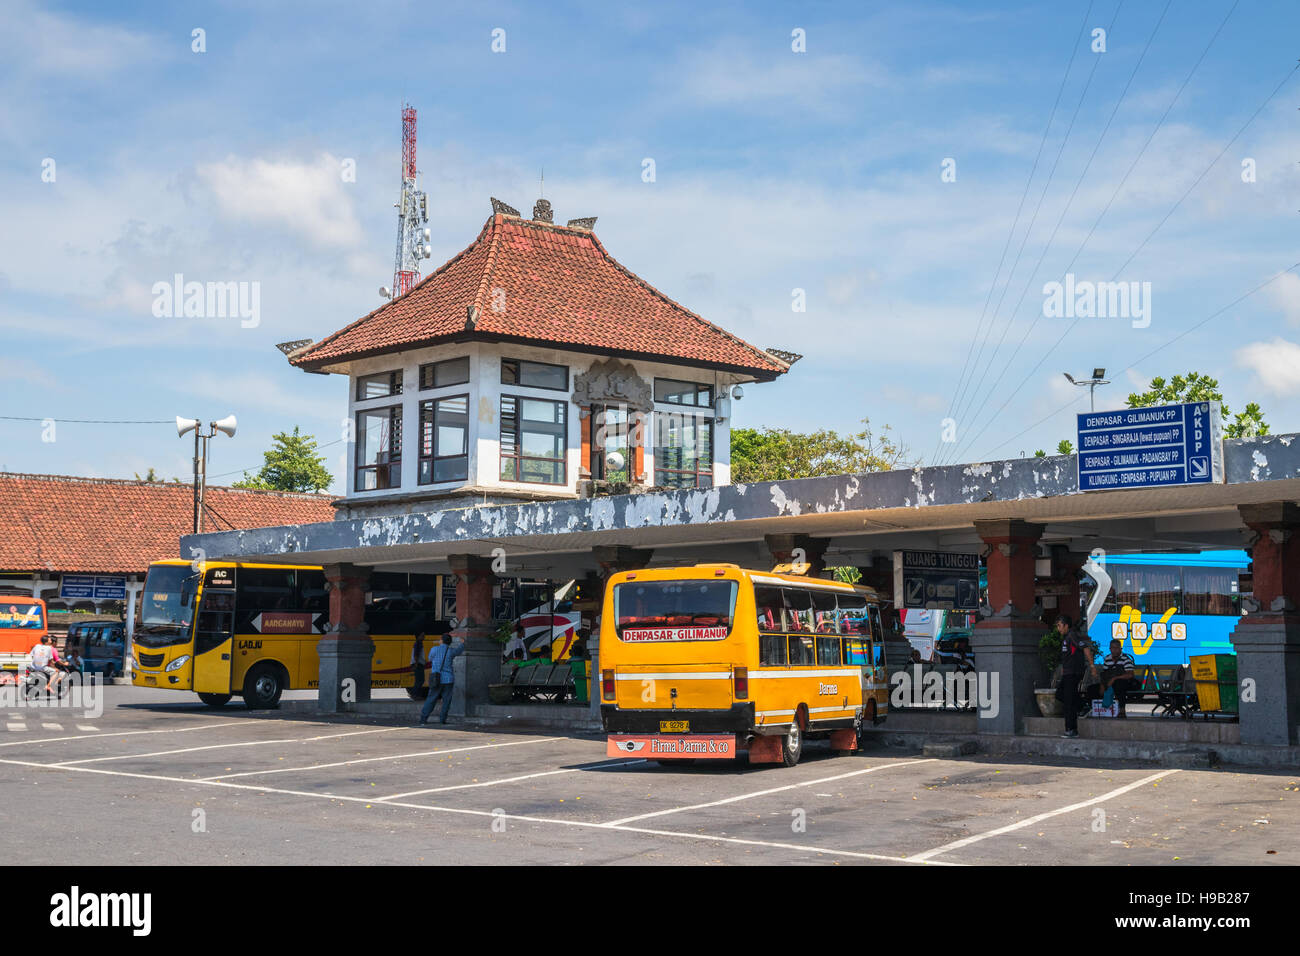 Buses waiting for departure at the Ubung Bus Terminal at a sunny day, Denpasar, Bali, Indonesia Stock Photo